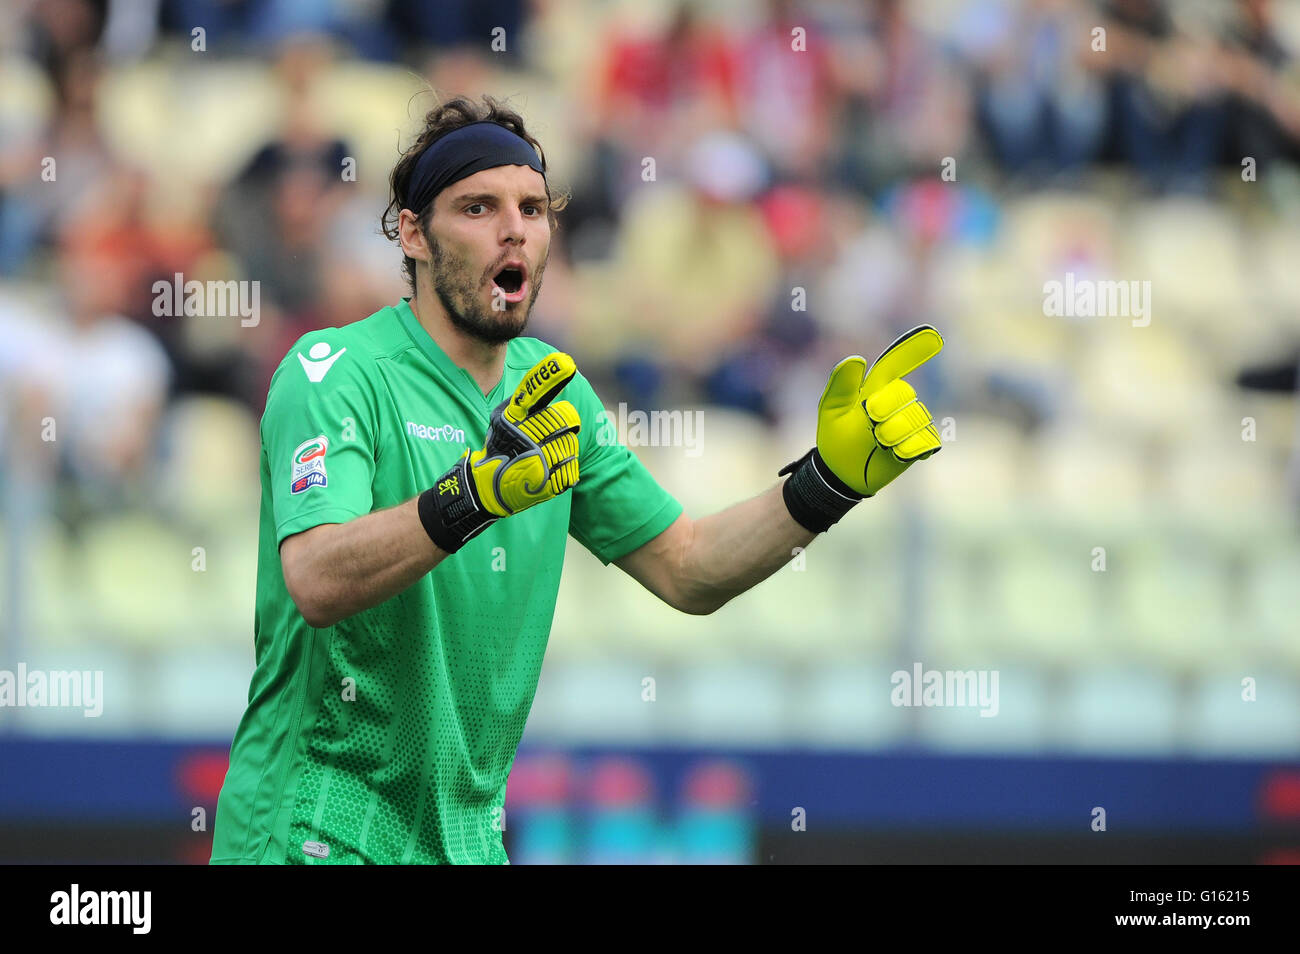 Modena, Italy. 08th May, 2016. Carpi Football Club vs SS Lazio Serie A football championship 2015/2016 at Modena Braglia Stadium. Federico Marchetti Lazio's goalkeeper during the Serie A football match between FC Carpi and SS Lazio at Braglia Stadium in Modena. Lazio beat by 3 to 1 on Carpi at the end of a race during which the Carpi missed two penalties with Nigerian forward Jerry Uche Mbakogu. © Massimo Morelli/Pacific Press/Alamy Live News Stock Photo